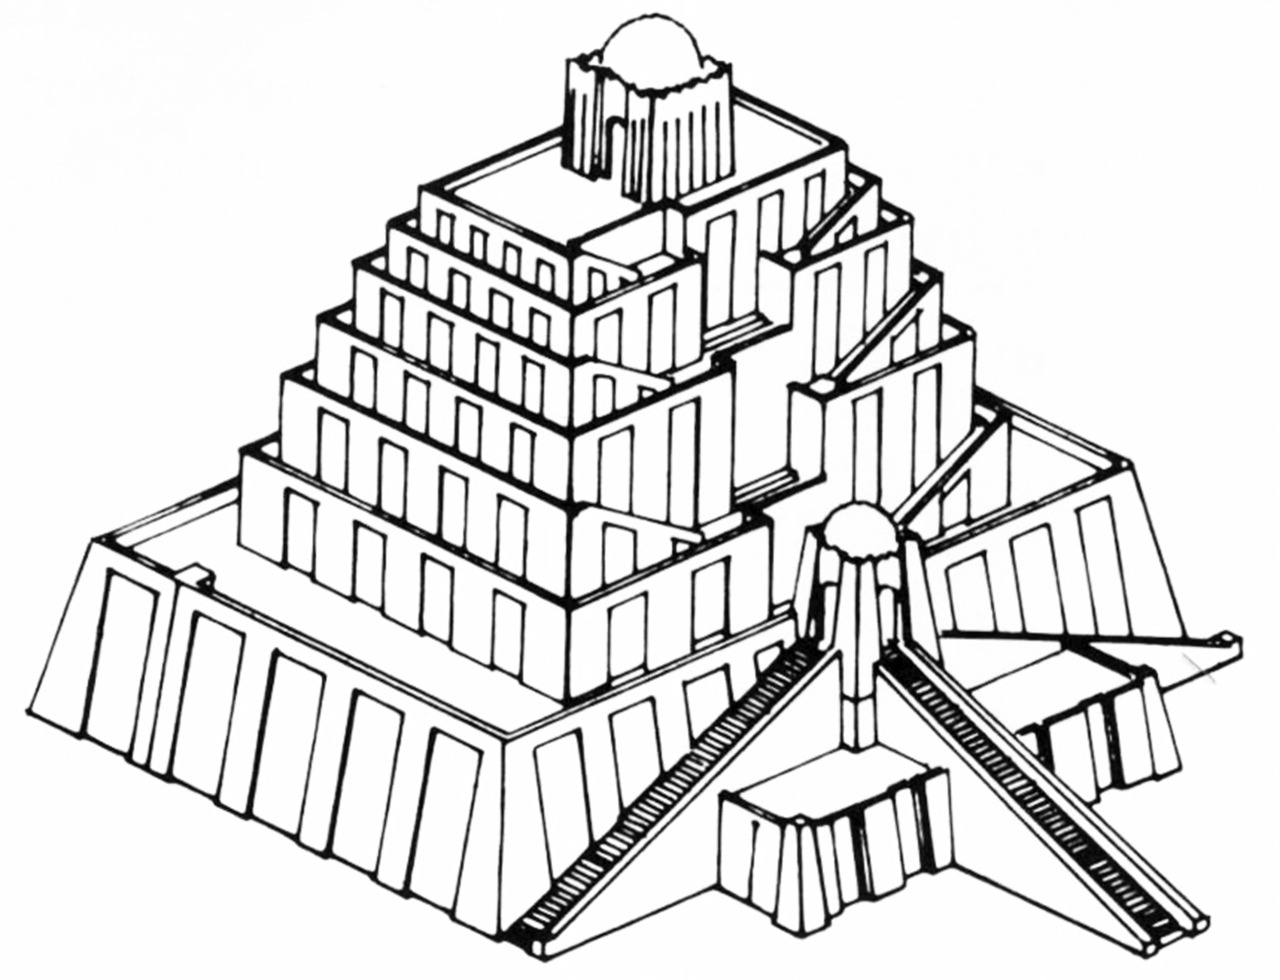 ziggurats of mesopotamia coloring pages - photo #7